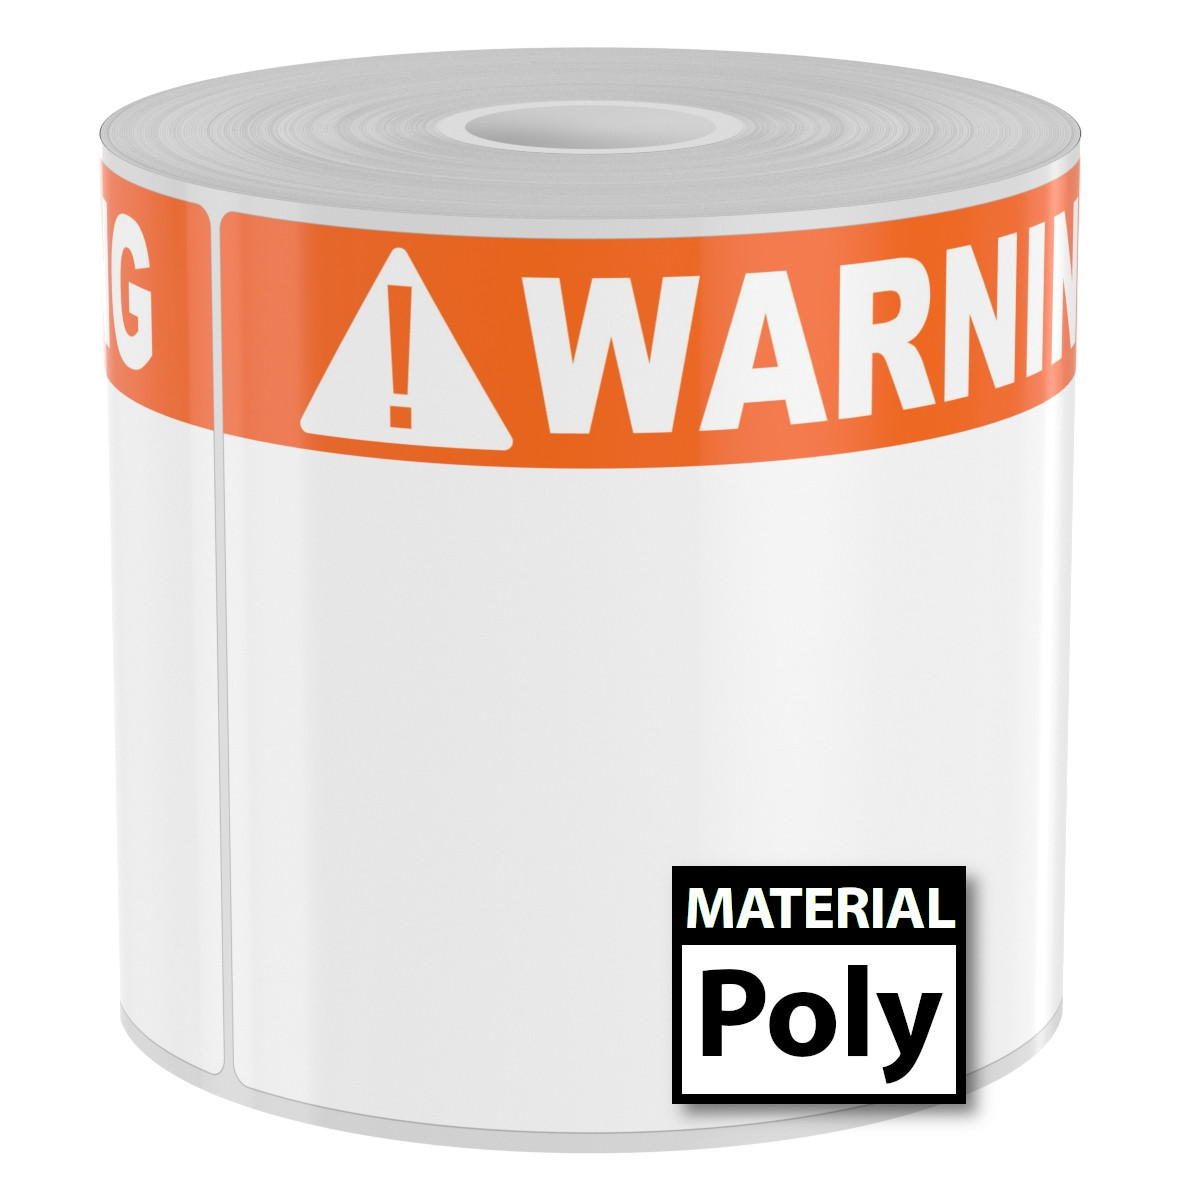 250 4in x 6in High-Performance Poly Arc Flash Labels White Warning on Orange Header